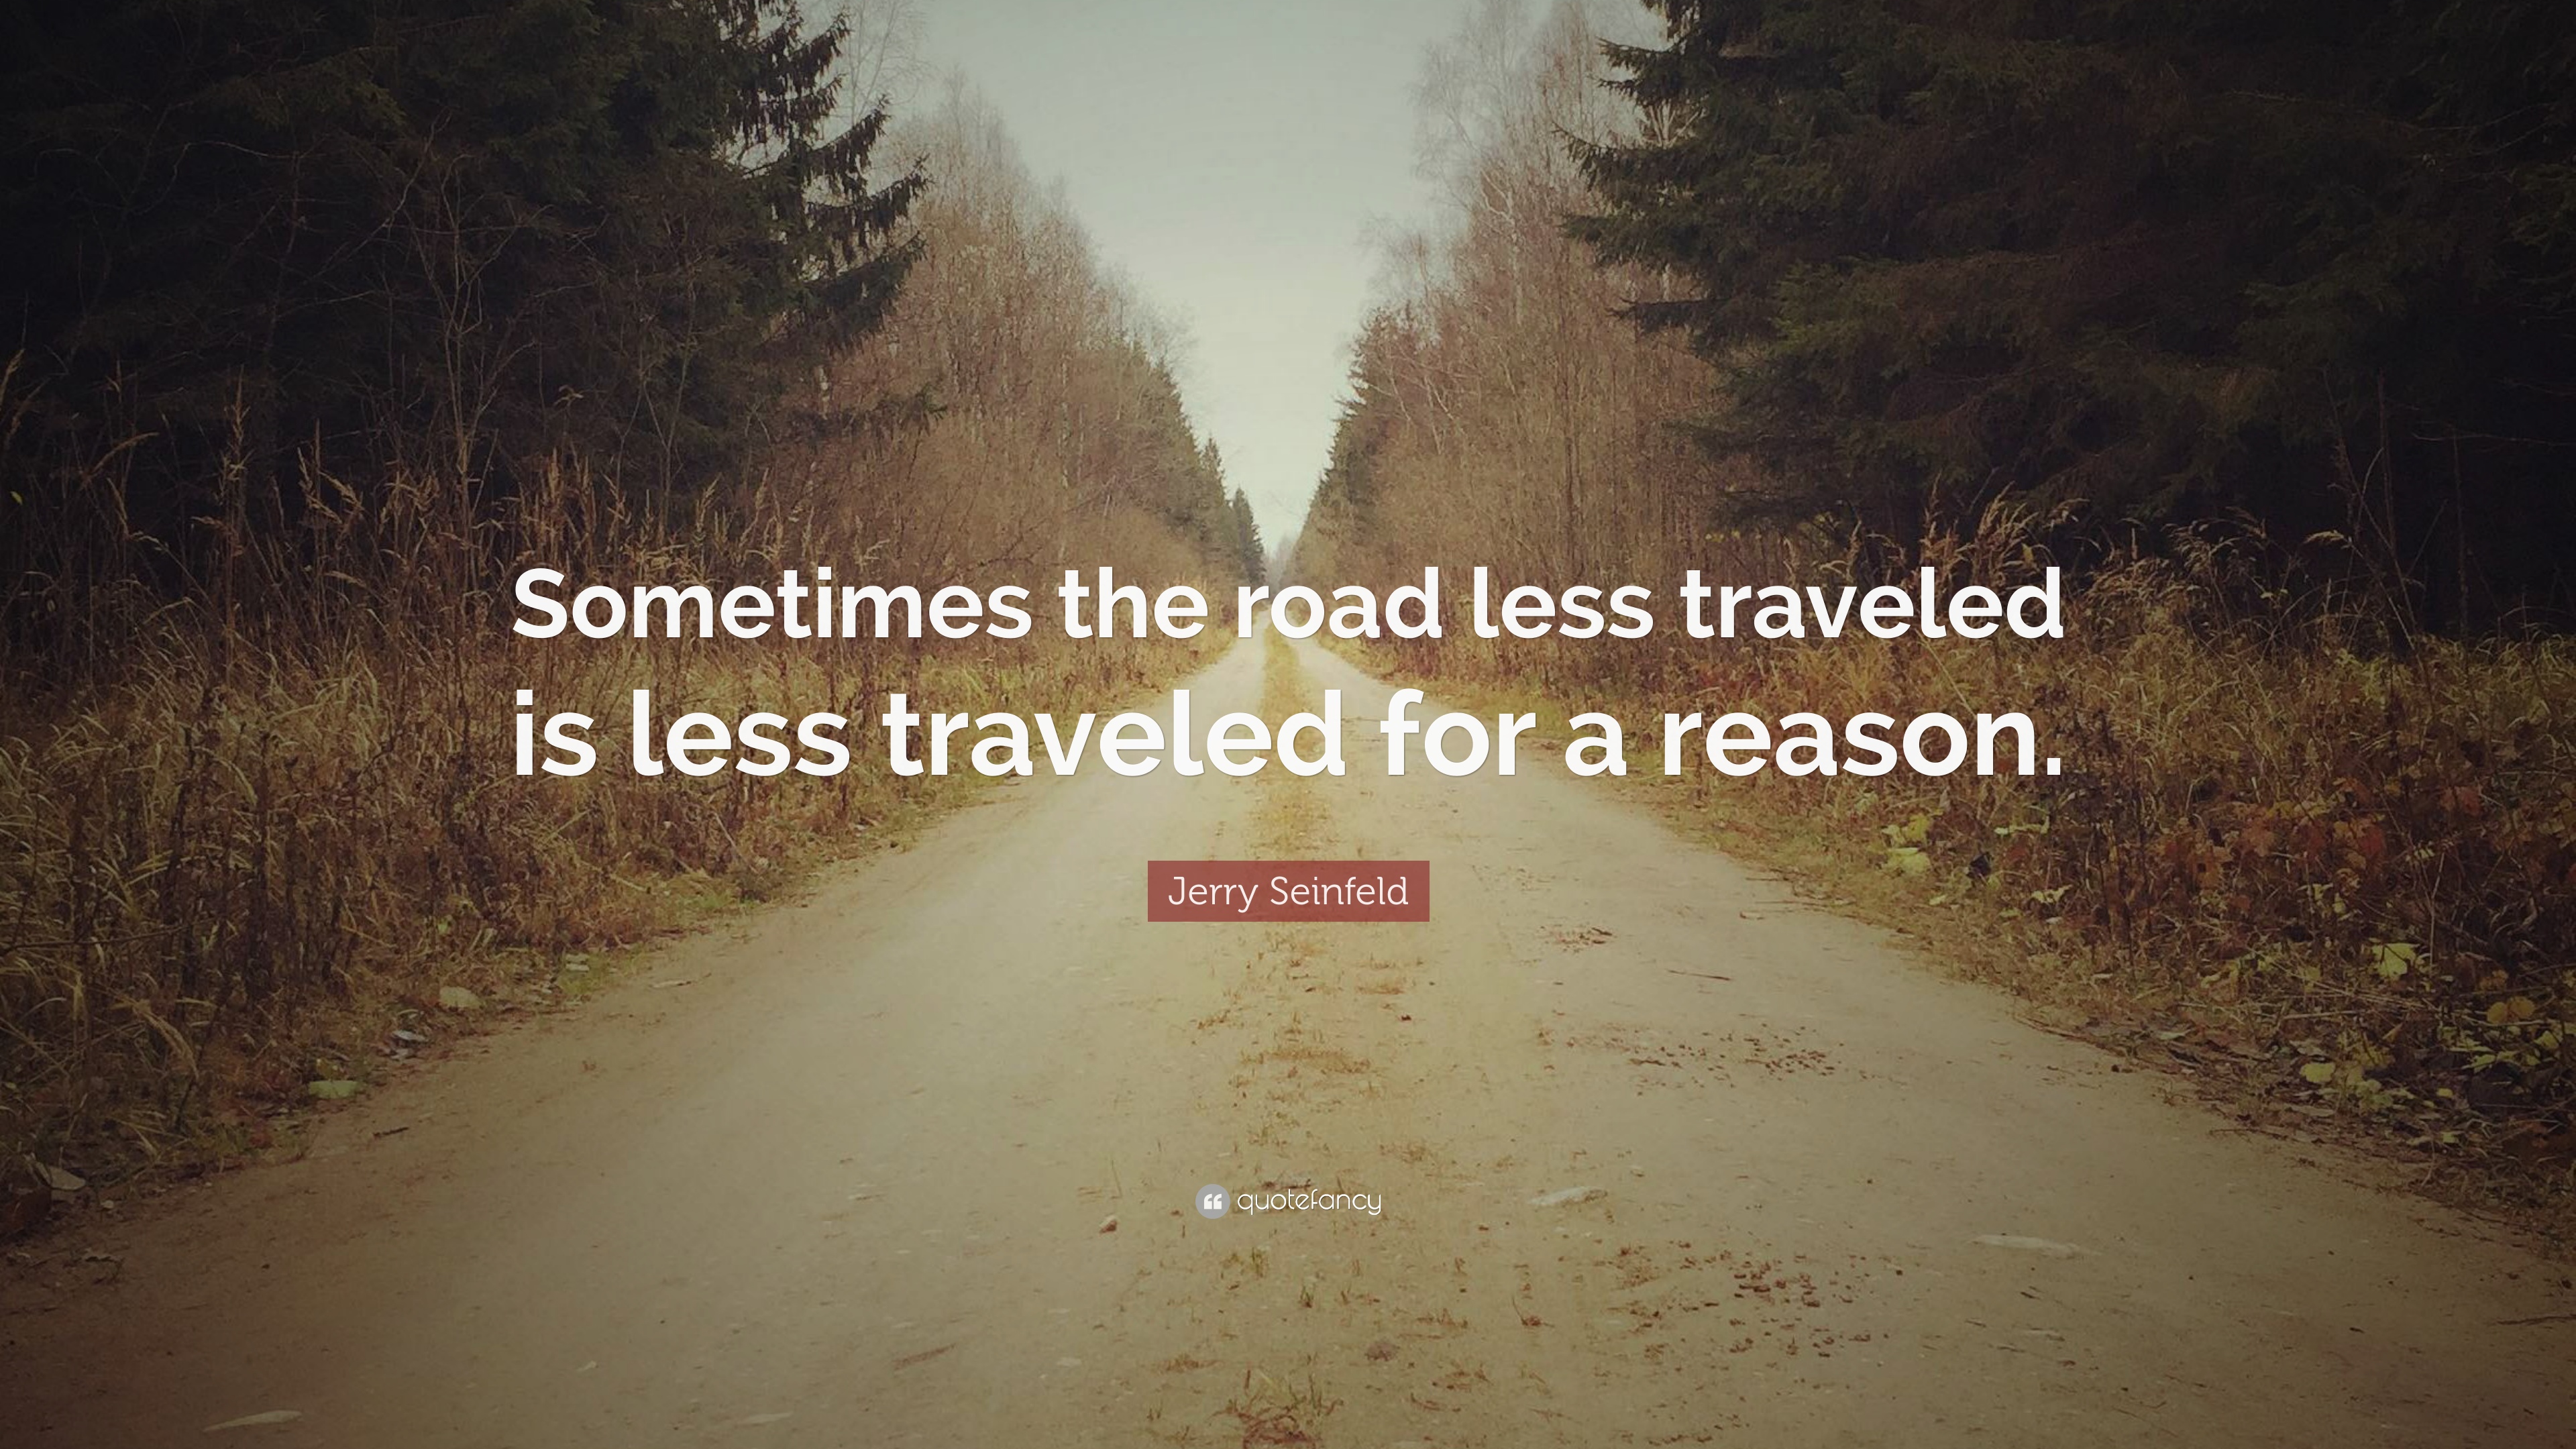 Jerry Seinfeld Quote: “Sometimes the road less traveled is less